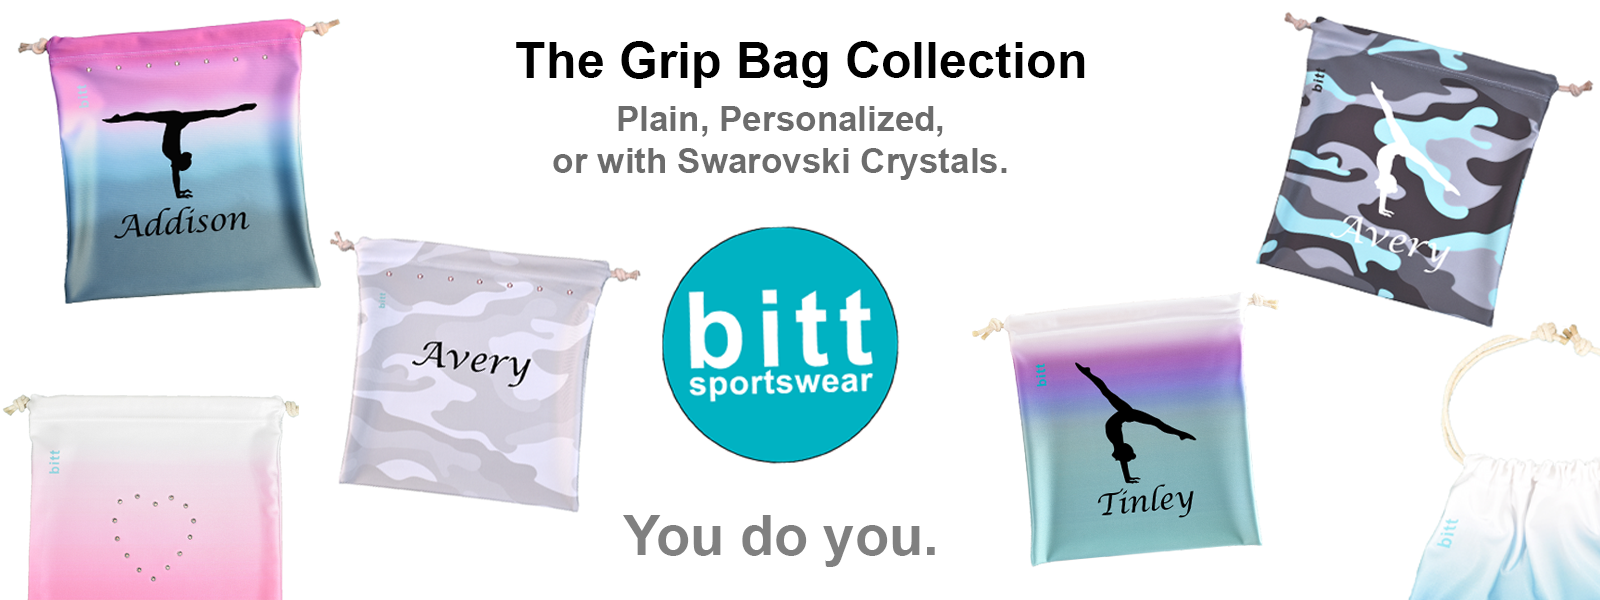 Personalized Gymnastics Grip Bags and Regular Grip Bags for Girls and Boys